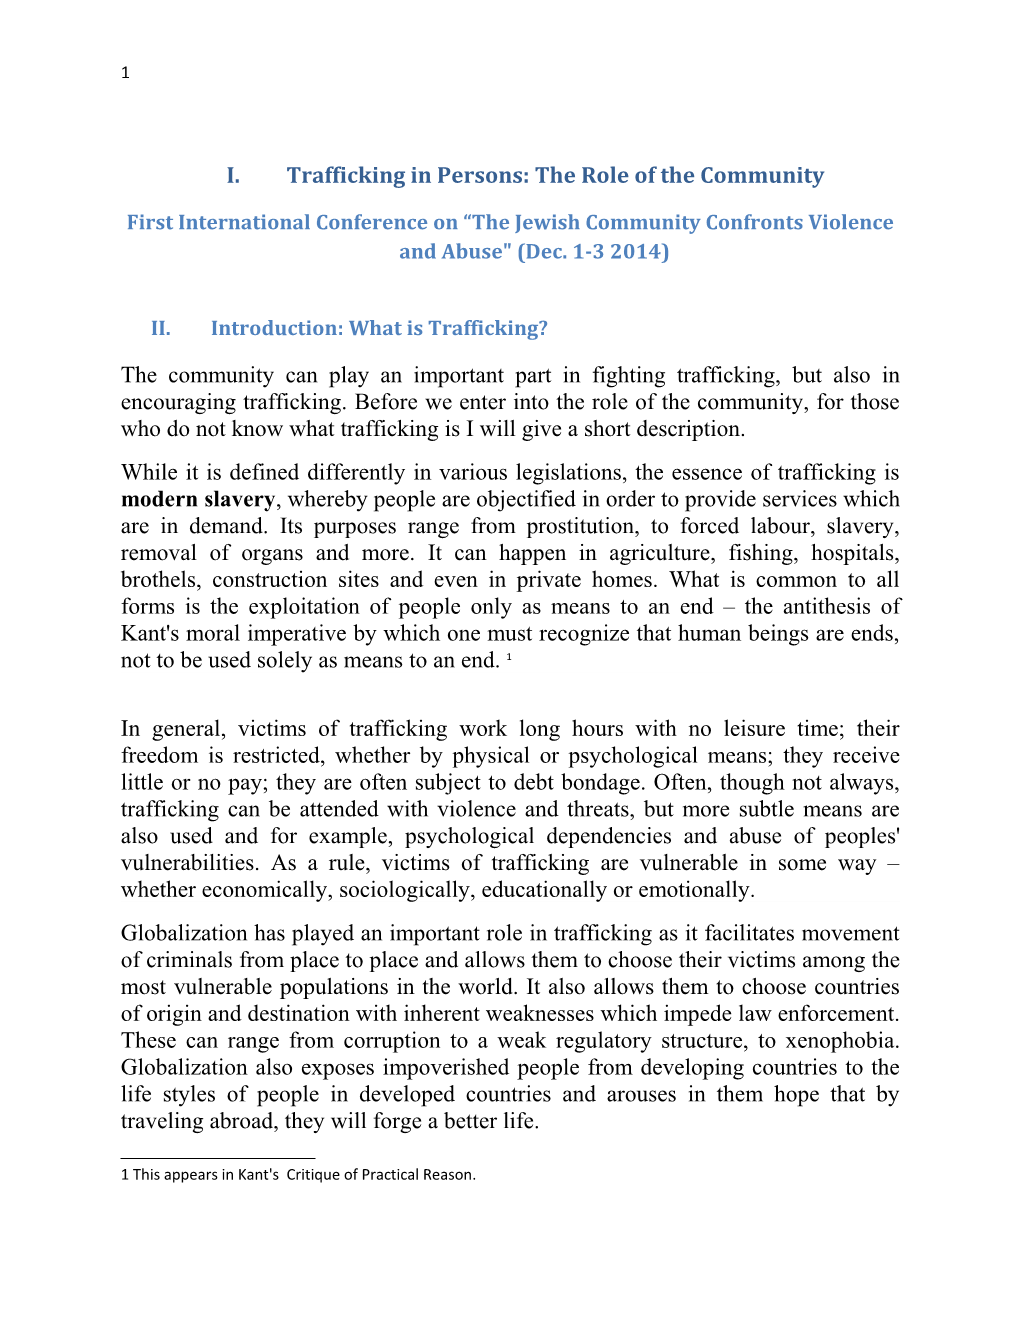 Rahel Gershuni, Trafficking in Persons: the Role of the Community